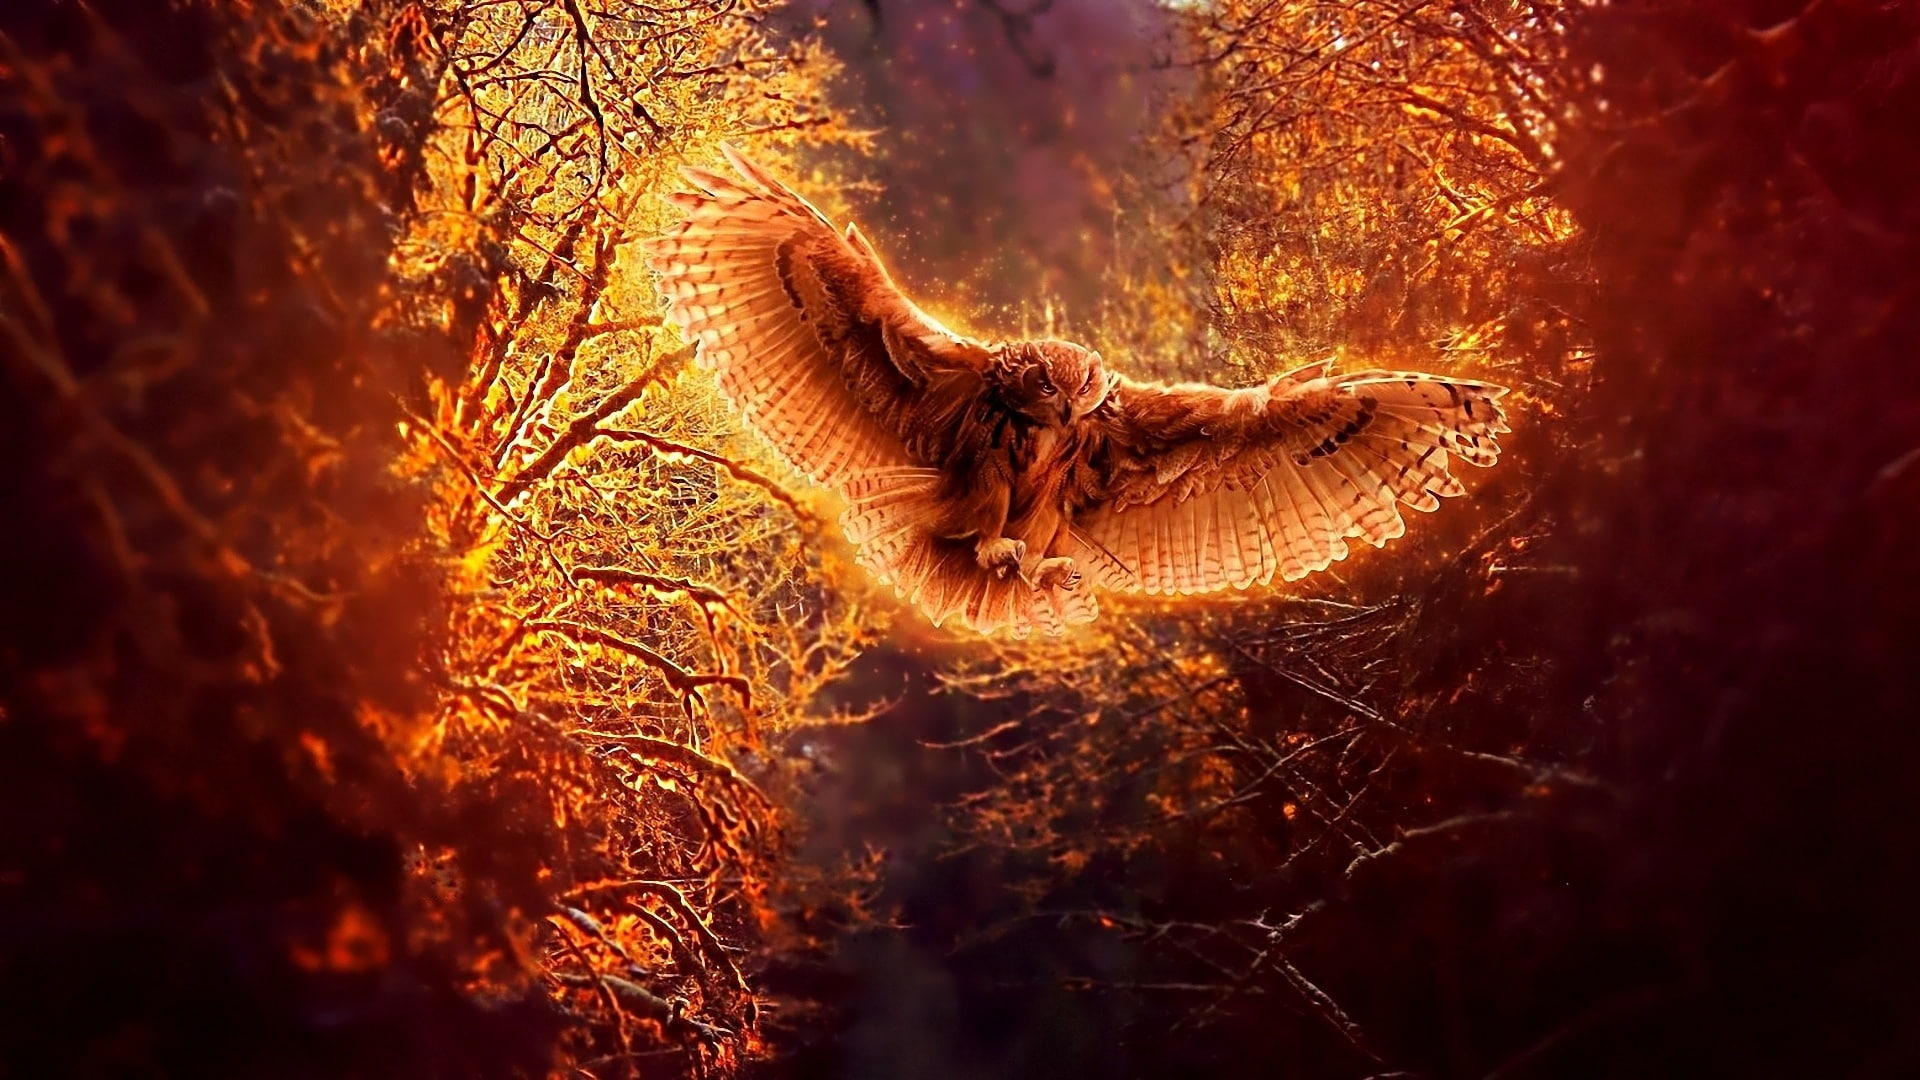 Owl in flight at night forest, orange and brown flying owl